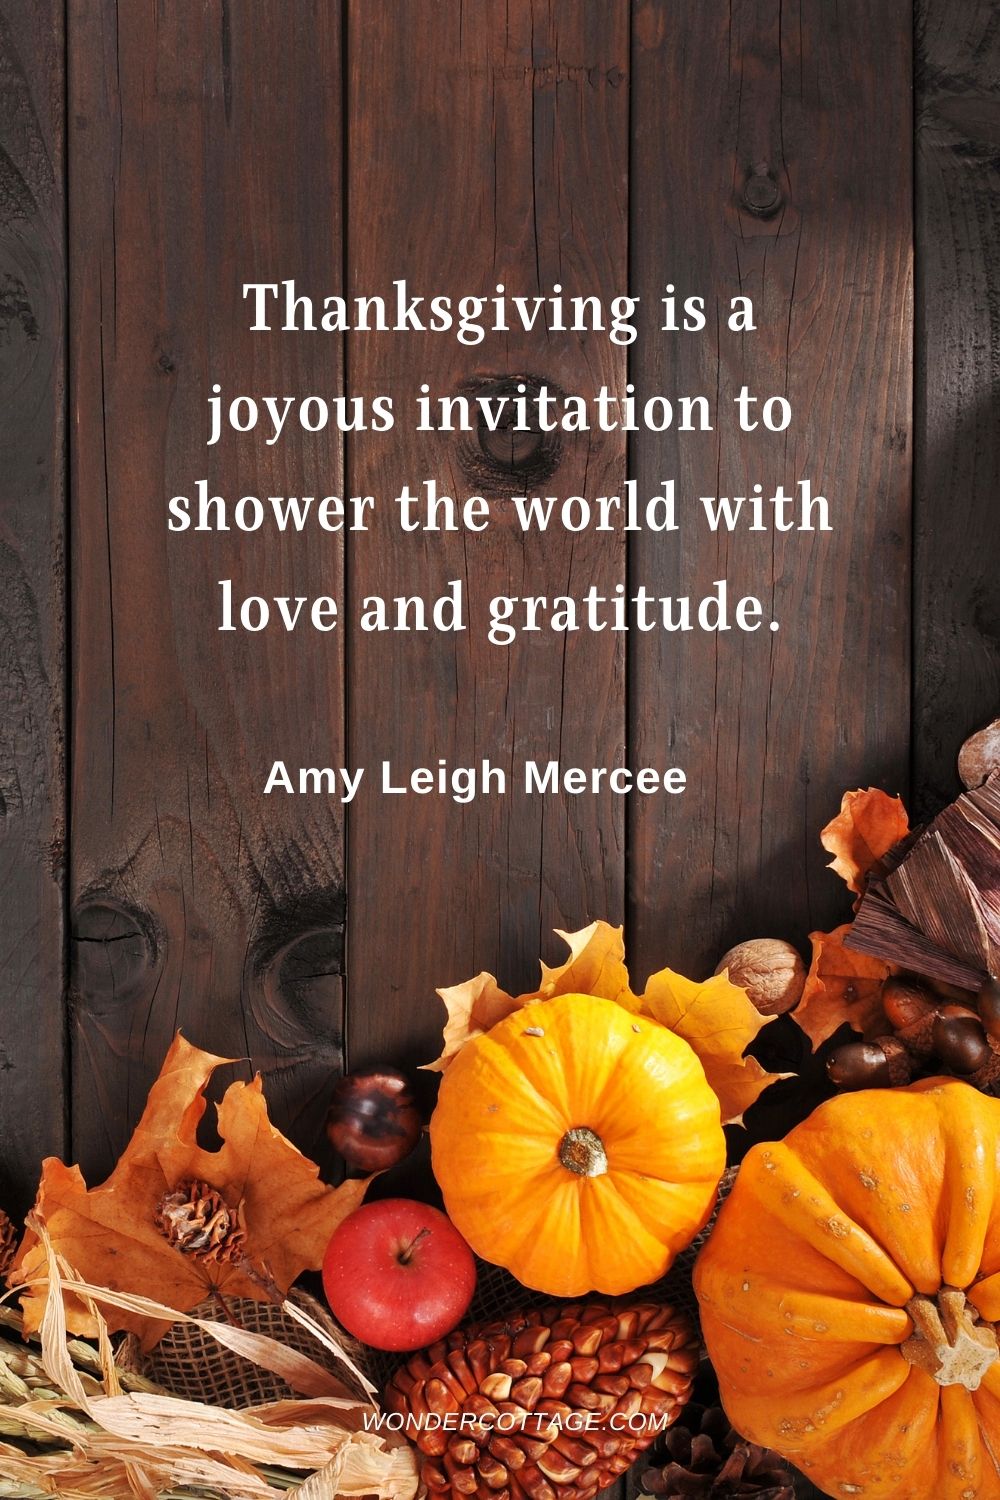 Thanksgiving is a joyous invitation to shower the world with love and gratitude. Amy Leigh Mercee